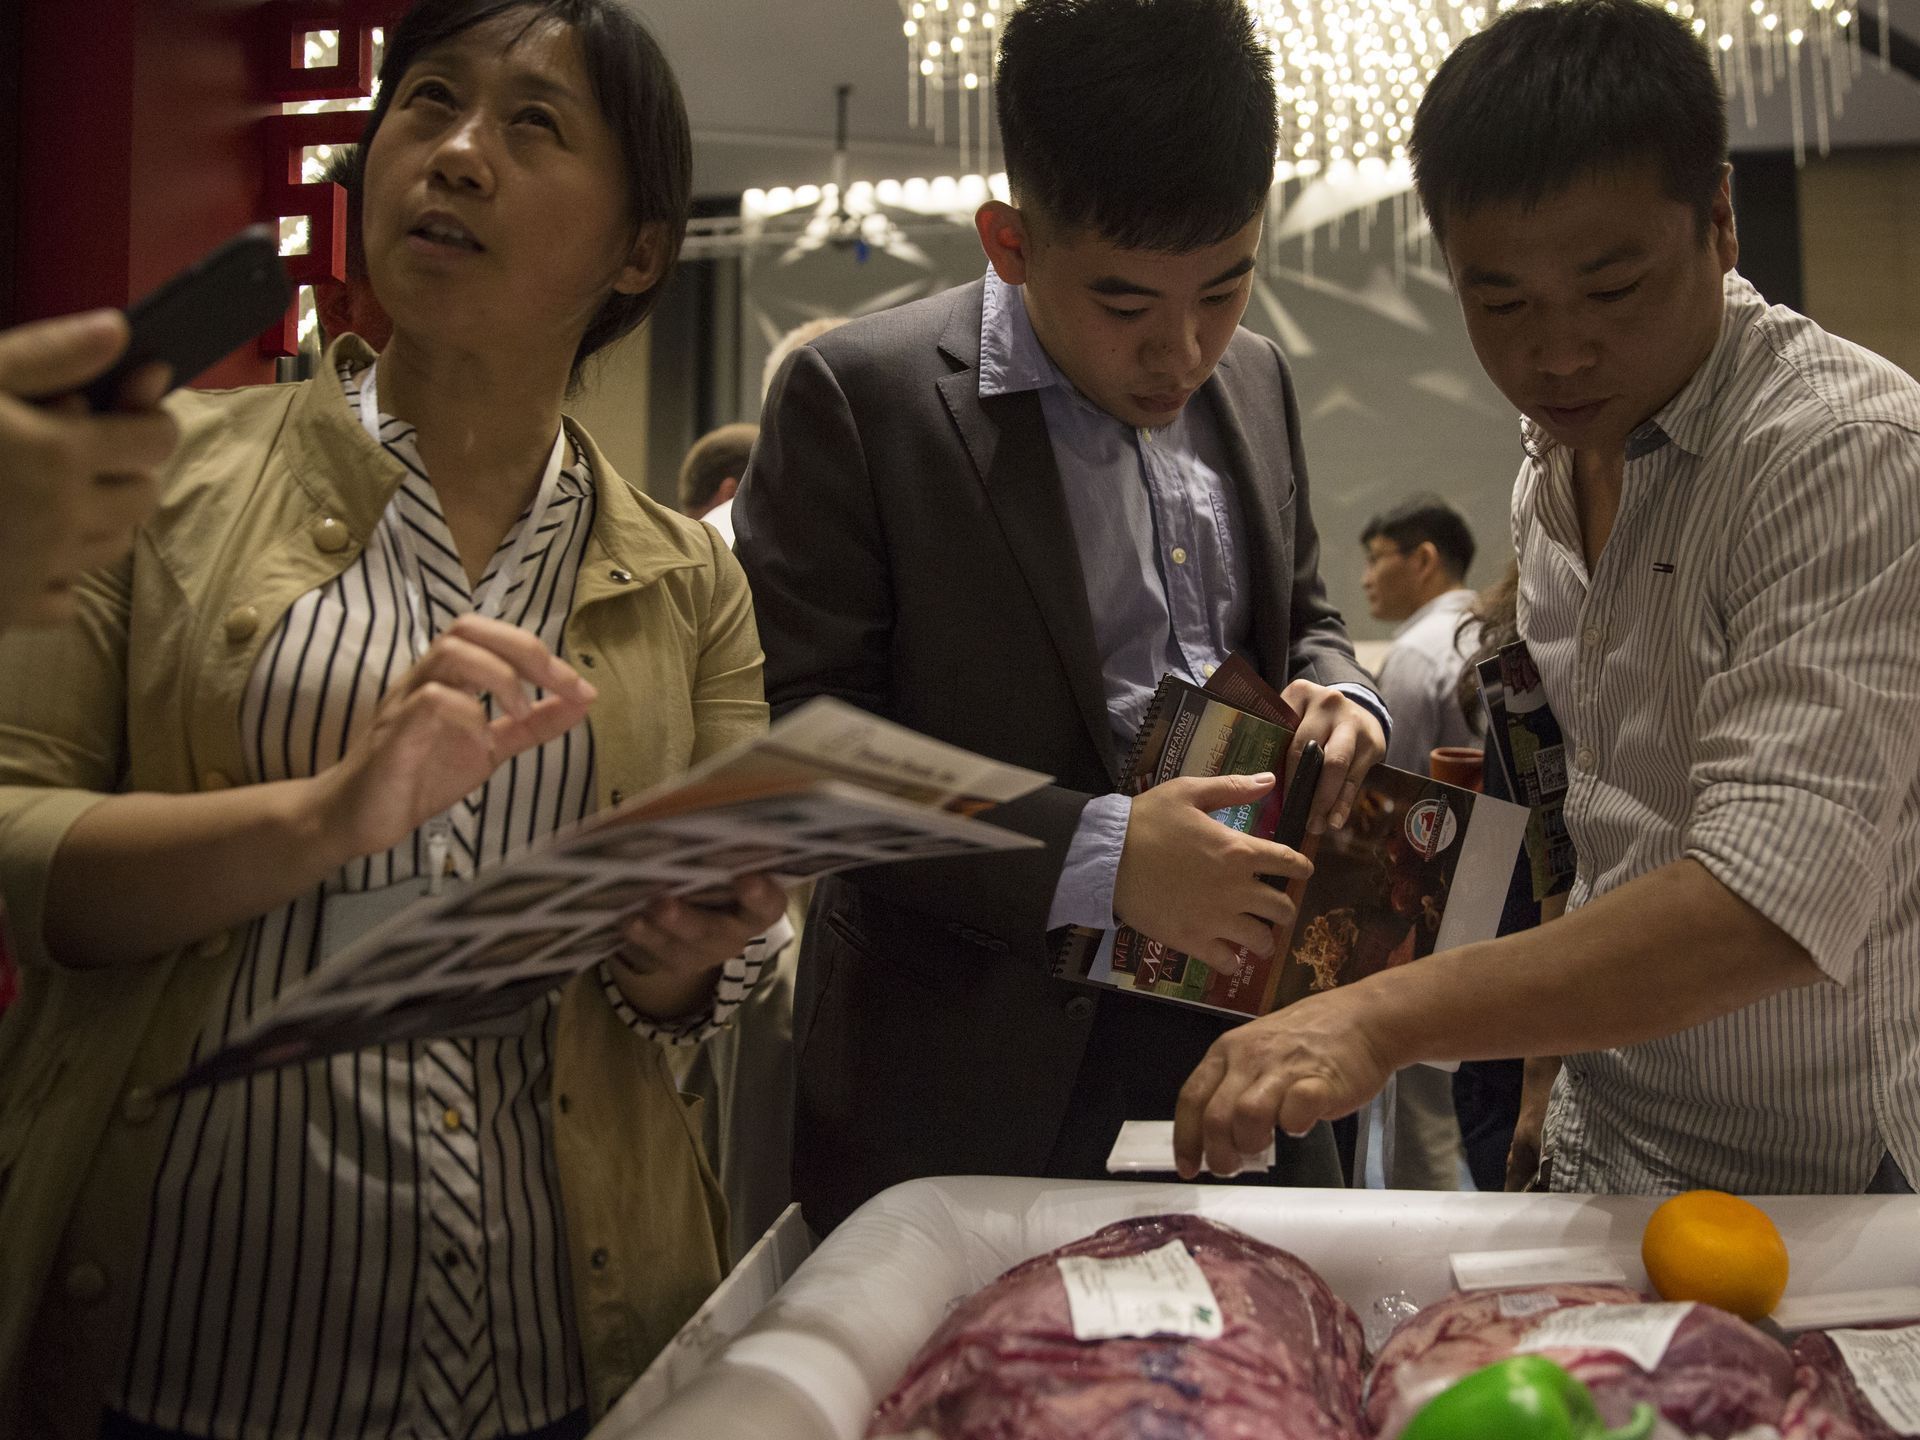 Chinese buyers take closer look at cuts of U.S. beef are set out on display at the China, U.S. beef road show on Monday, Sept. 25, 2017, at the Intercontinental Hotel in Beijing, China. The road show was meant to introduce Chinese buyers to U.S. beef after the recent opening of that market. Image by Kelsey Kremer.